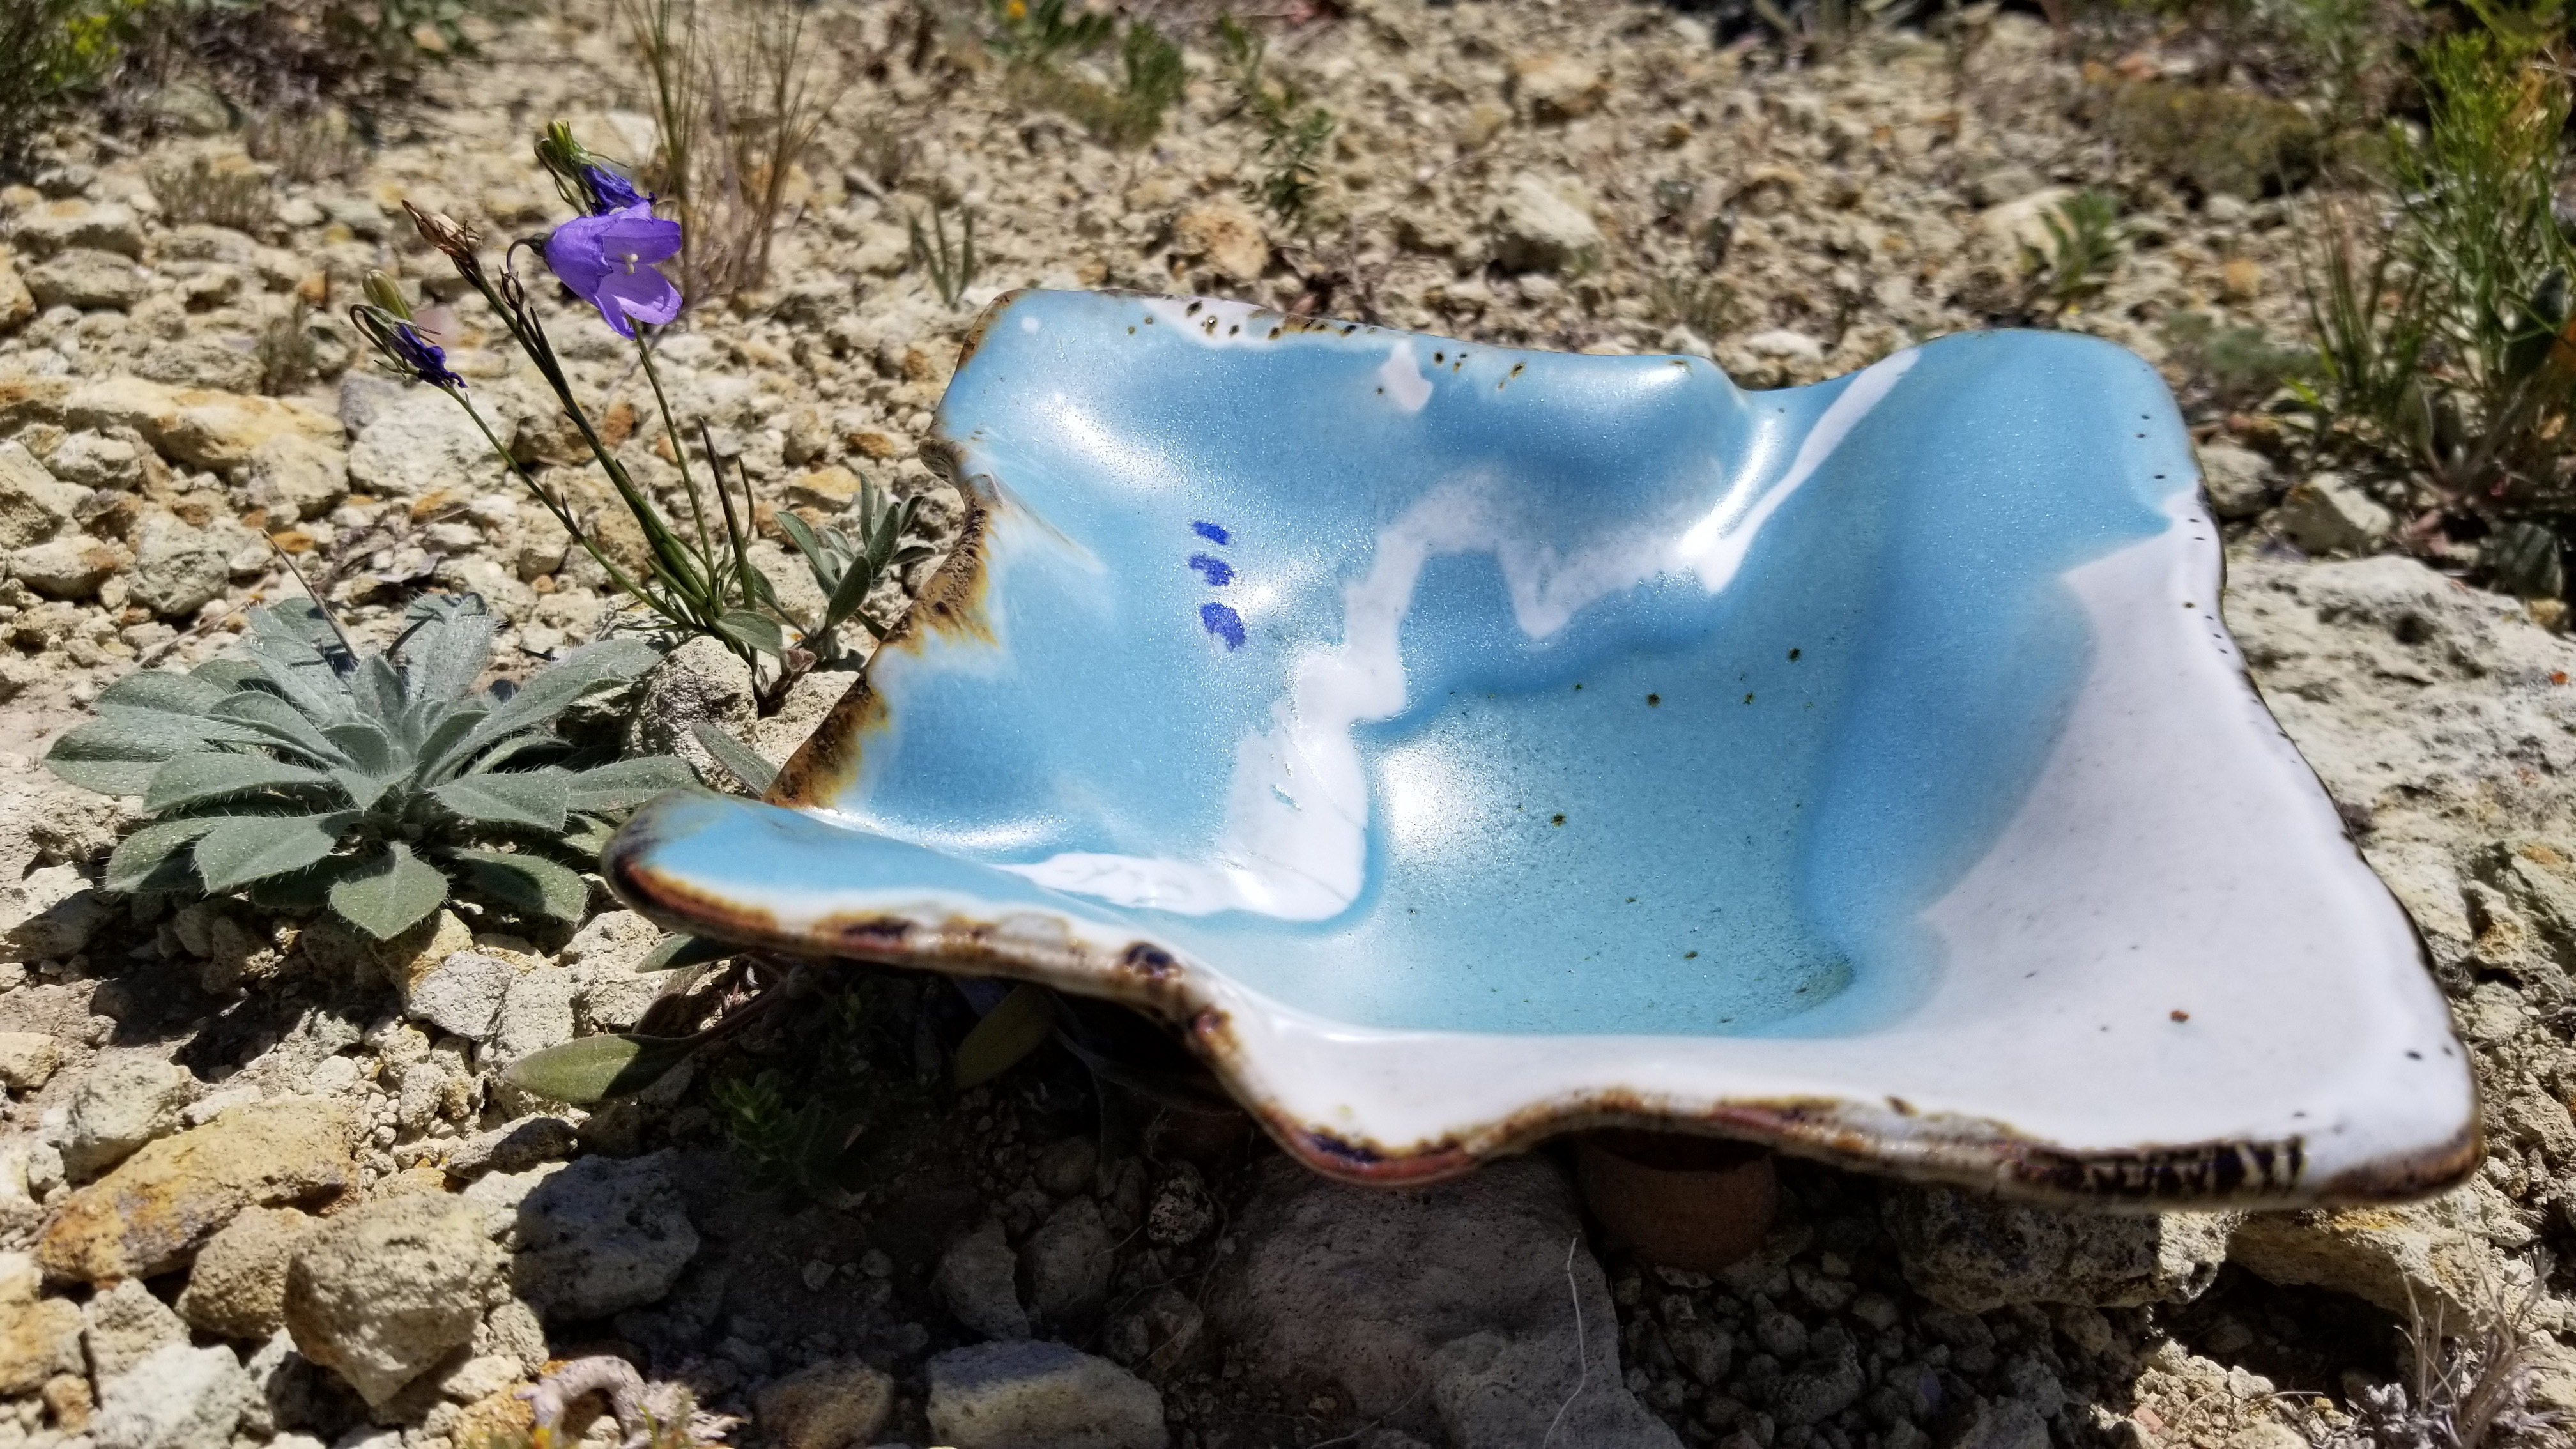 Smith made this hand-built plate using a Sage glaze. Here it's set next to its namesake